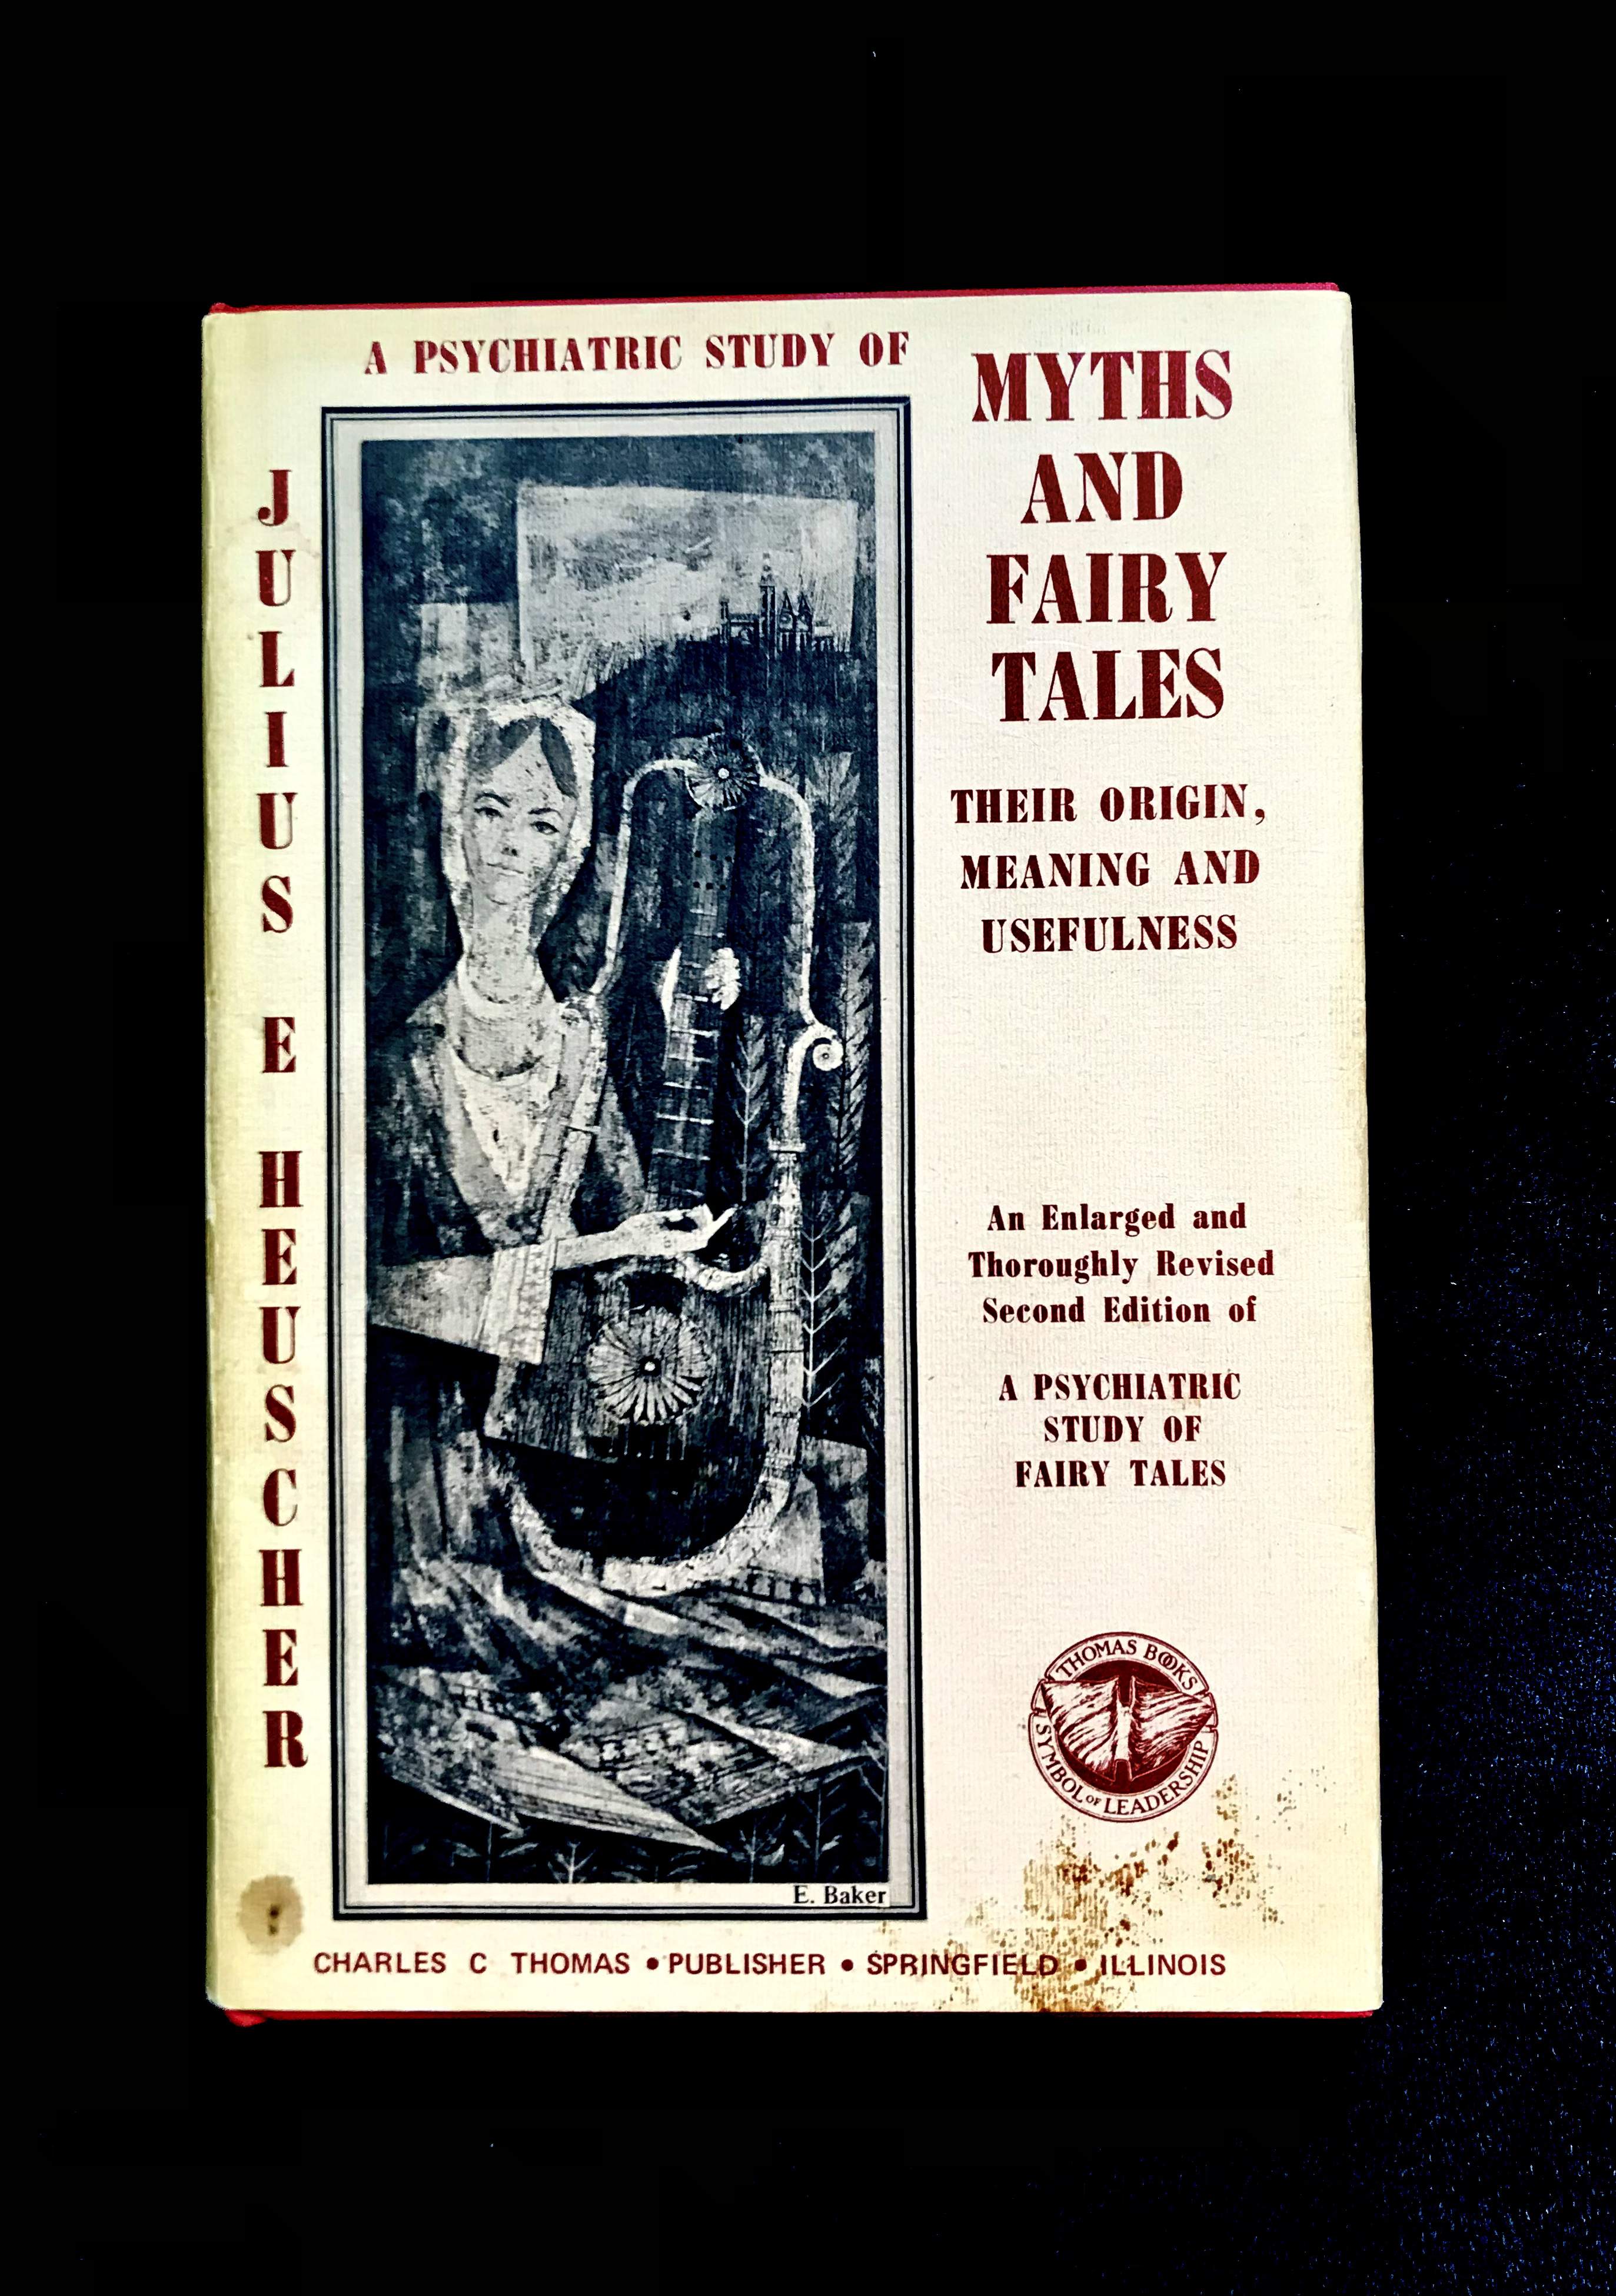 A Psychiatric Study Of Myths And Fairy Tales by Julius E. Heuscher